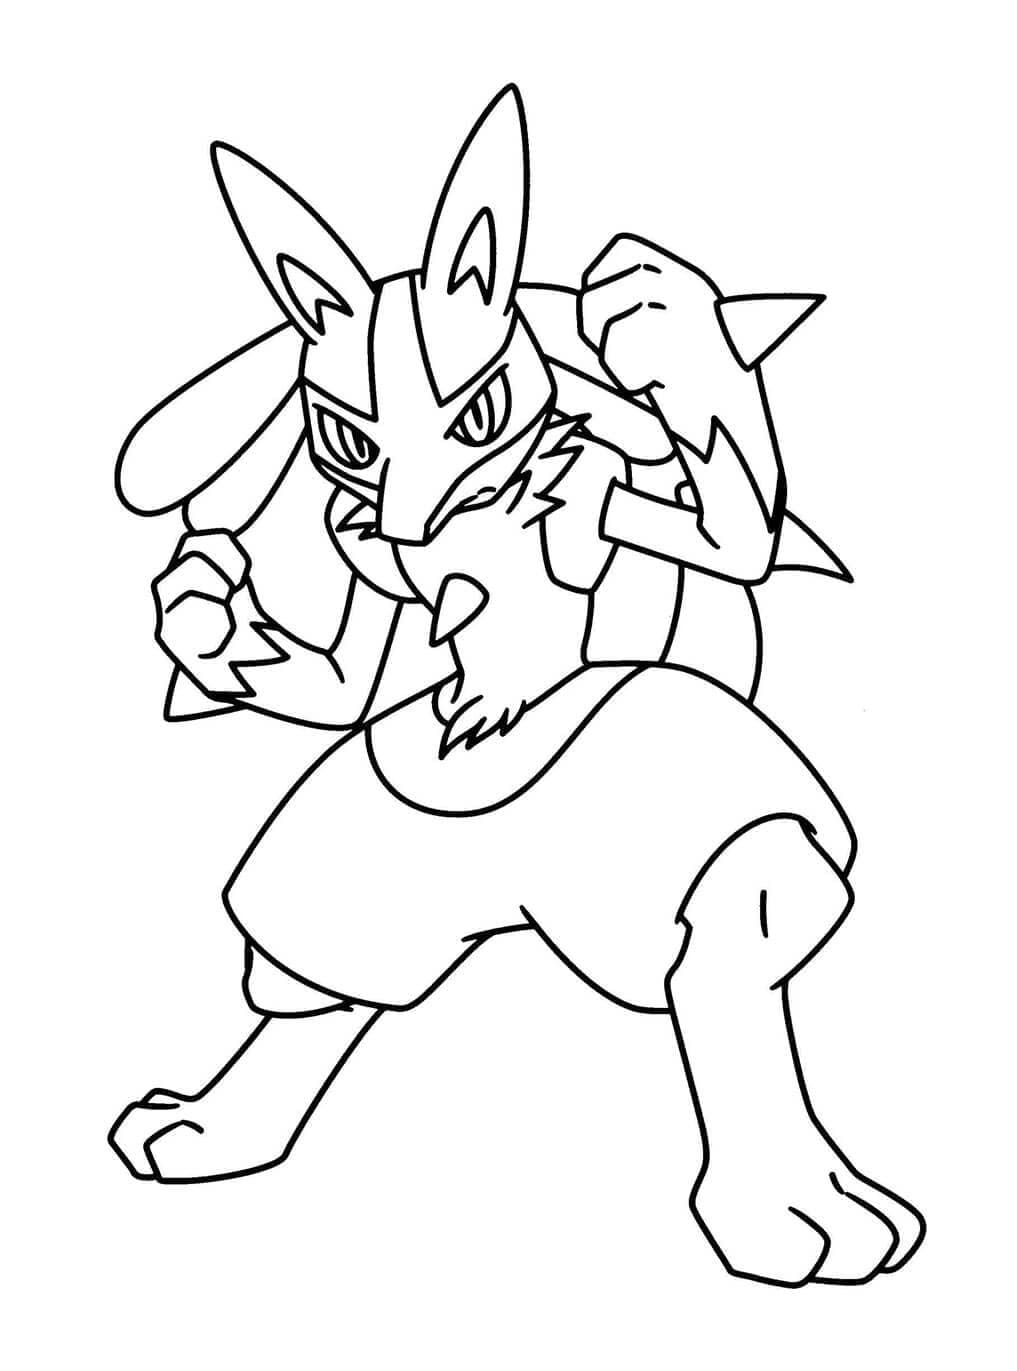 Print lucario coloring page